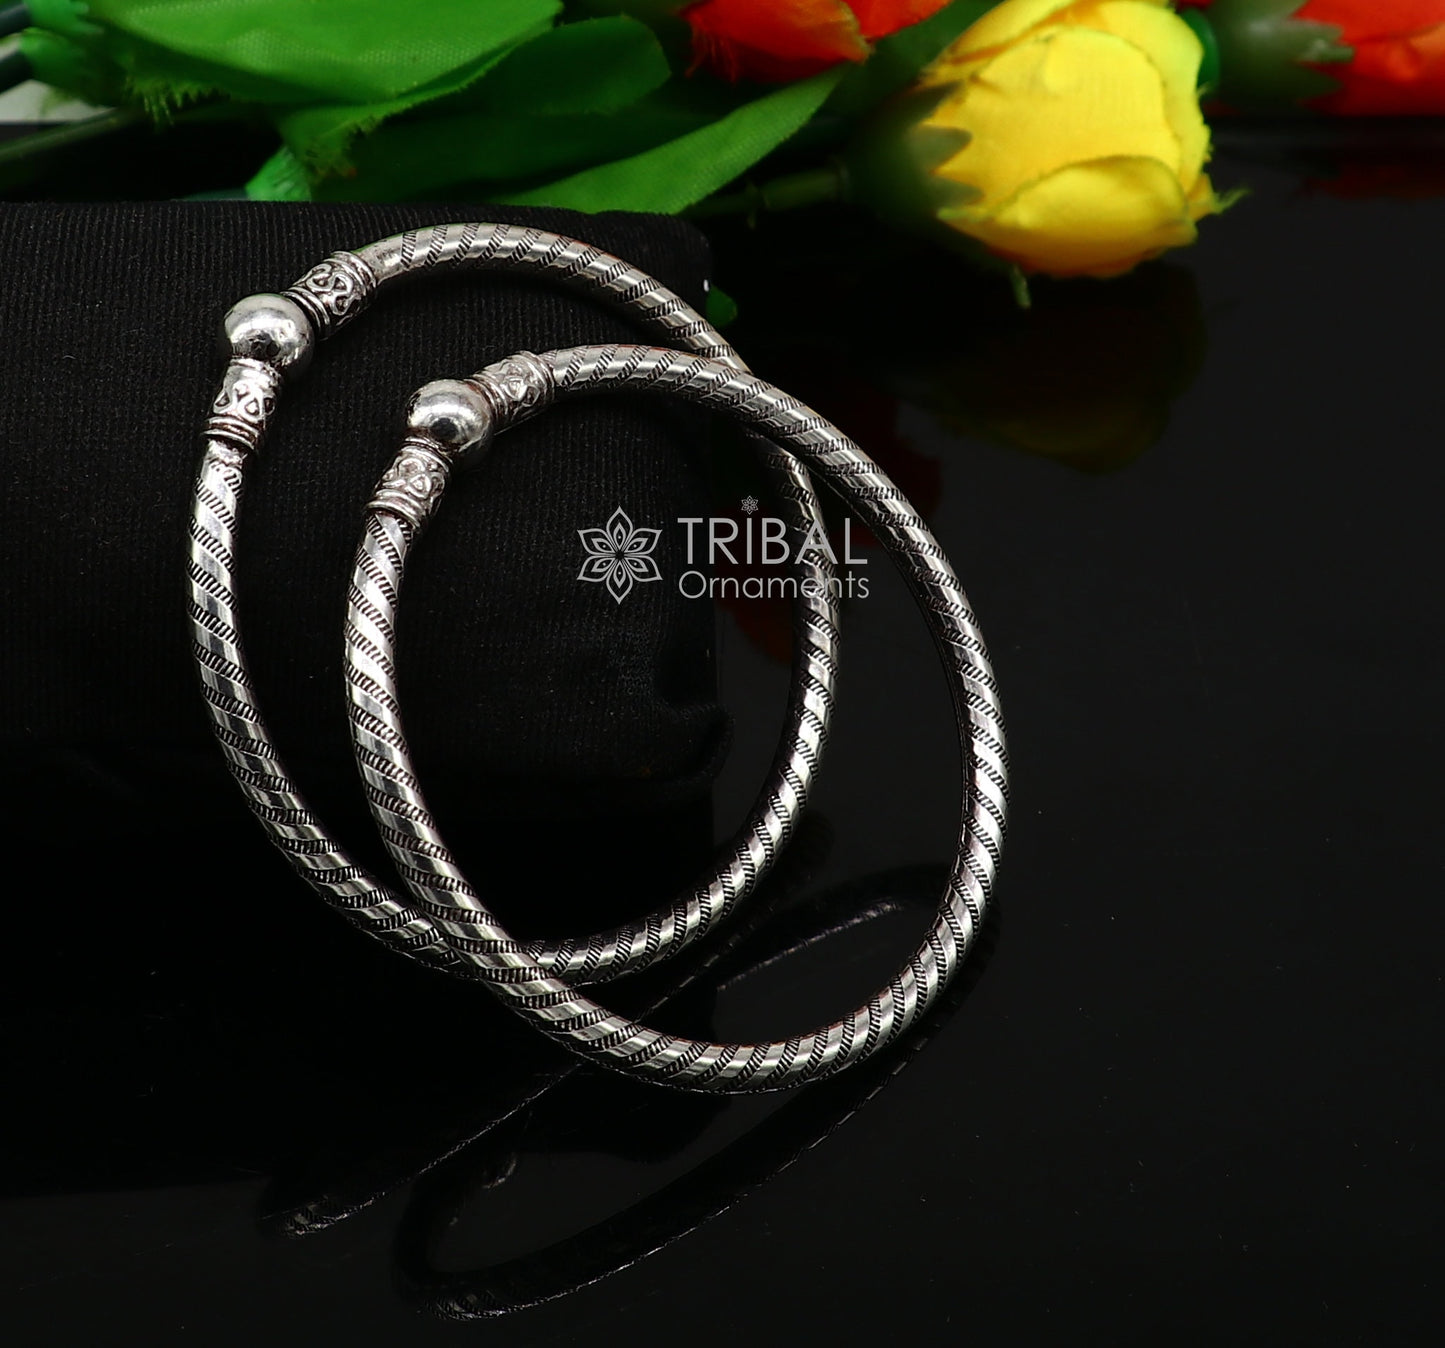 925 sterling silver handmade unique cultural design trendy kada bracelet for men's and girl's, best delicate Light weight jewelry nsk666 - TRIBAL ORNAMENTS